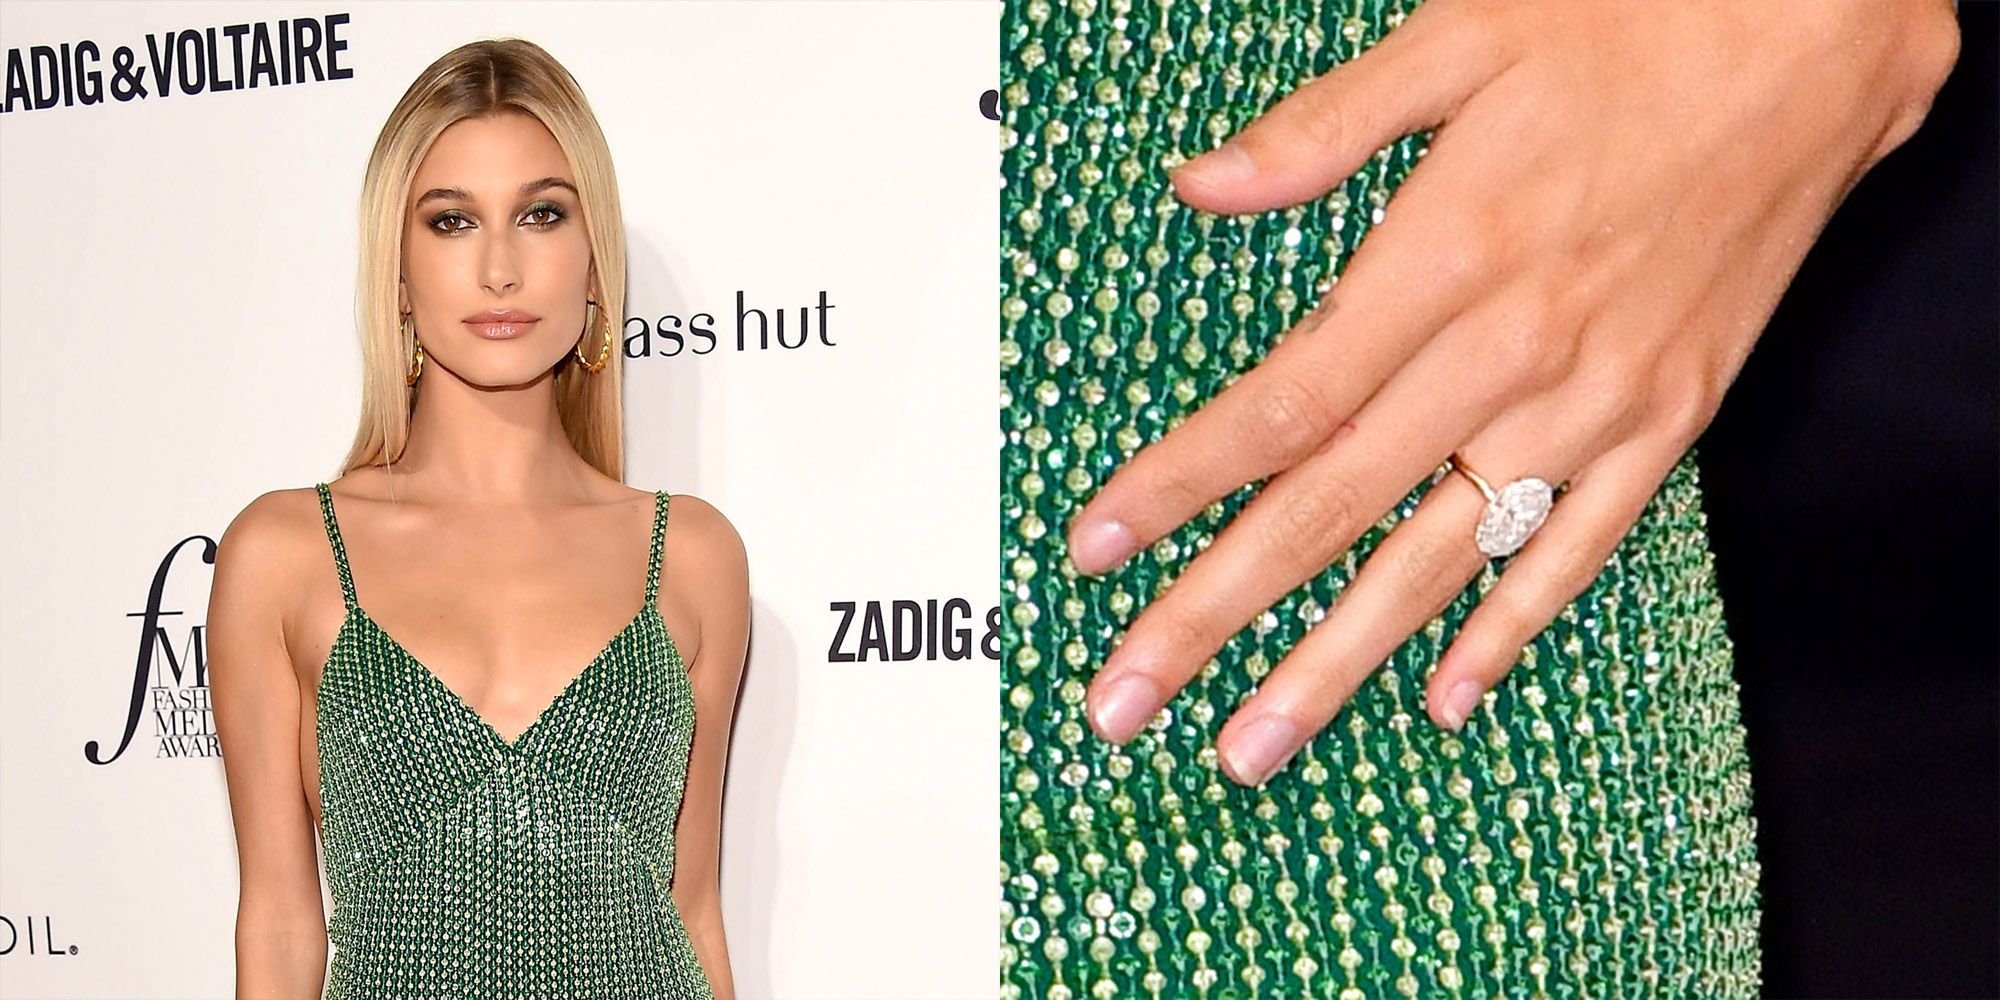 Spectacular Engagement Rings of the Stars